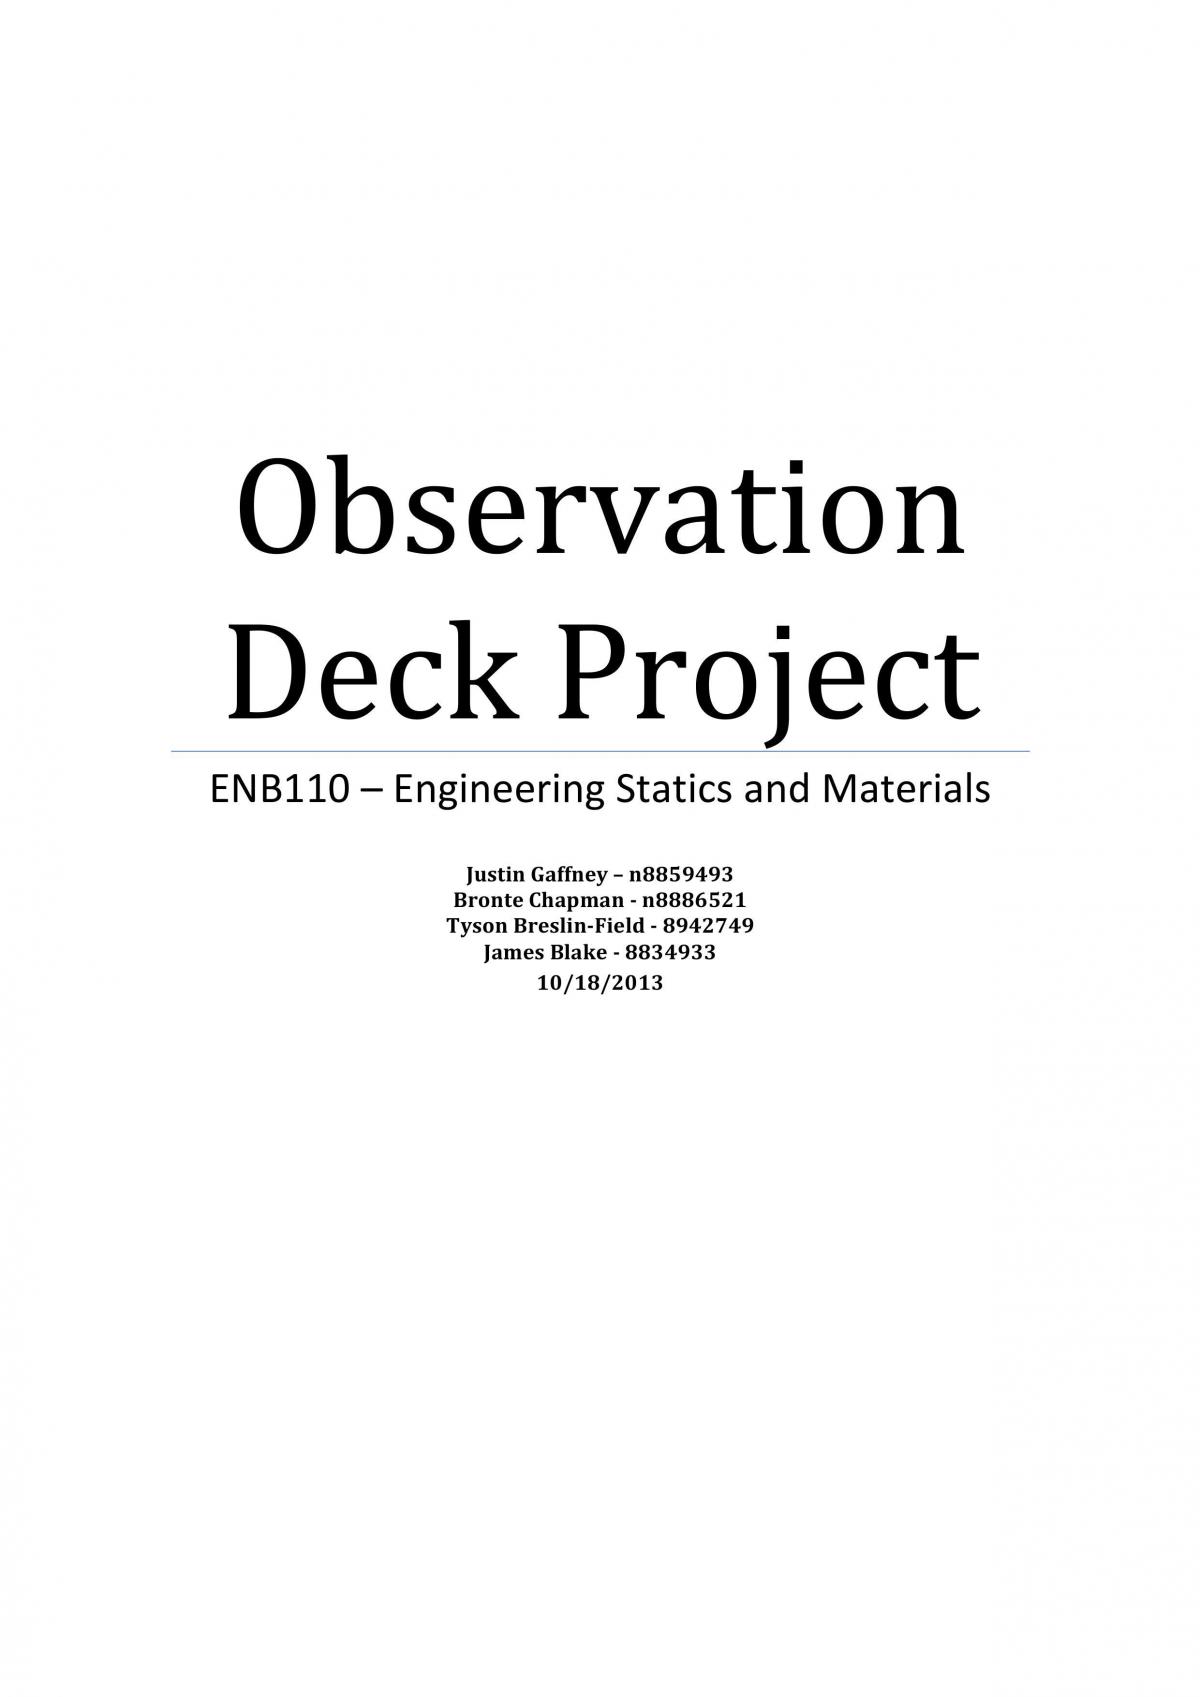 Observation Deck Project - Page 1